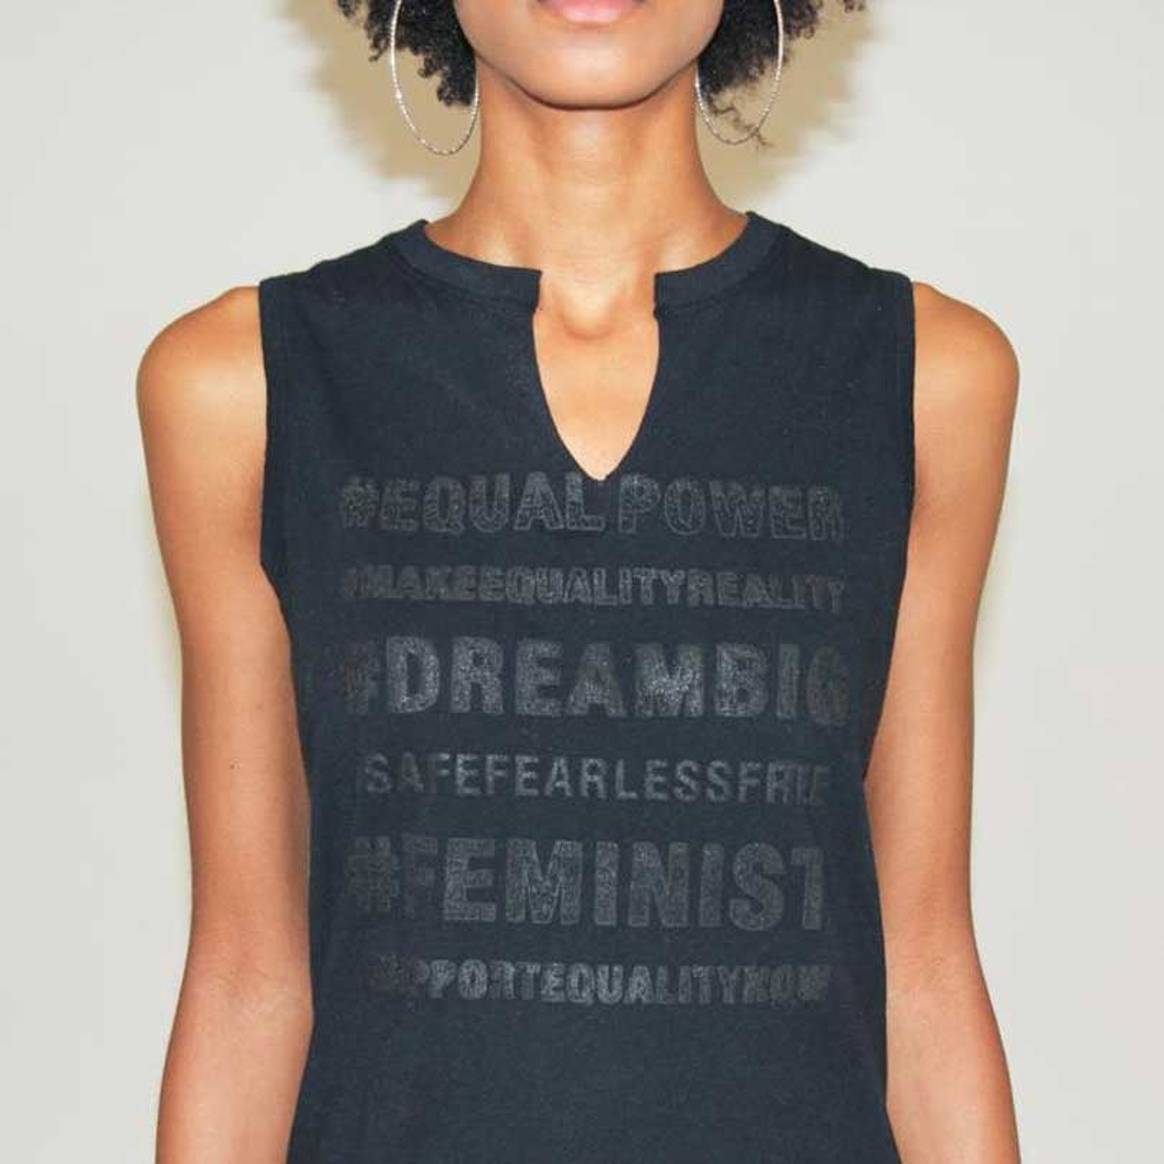 Round + Square founder on fighting for women’s rights through fashion